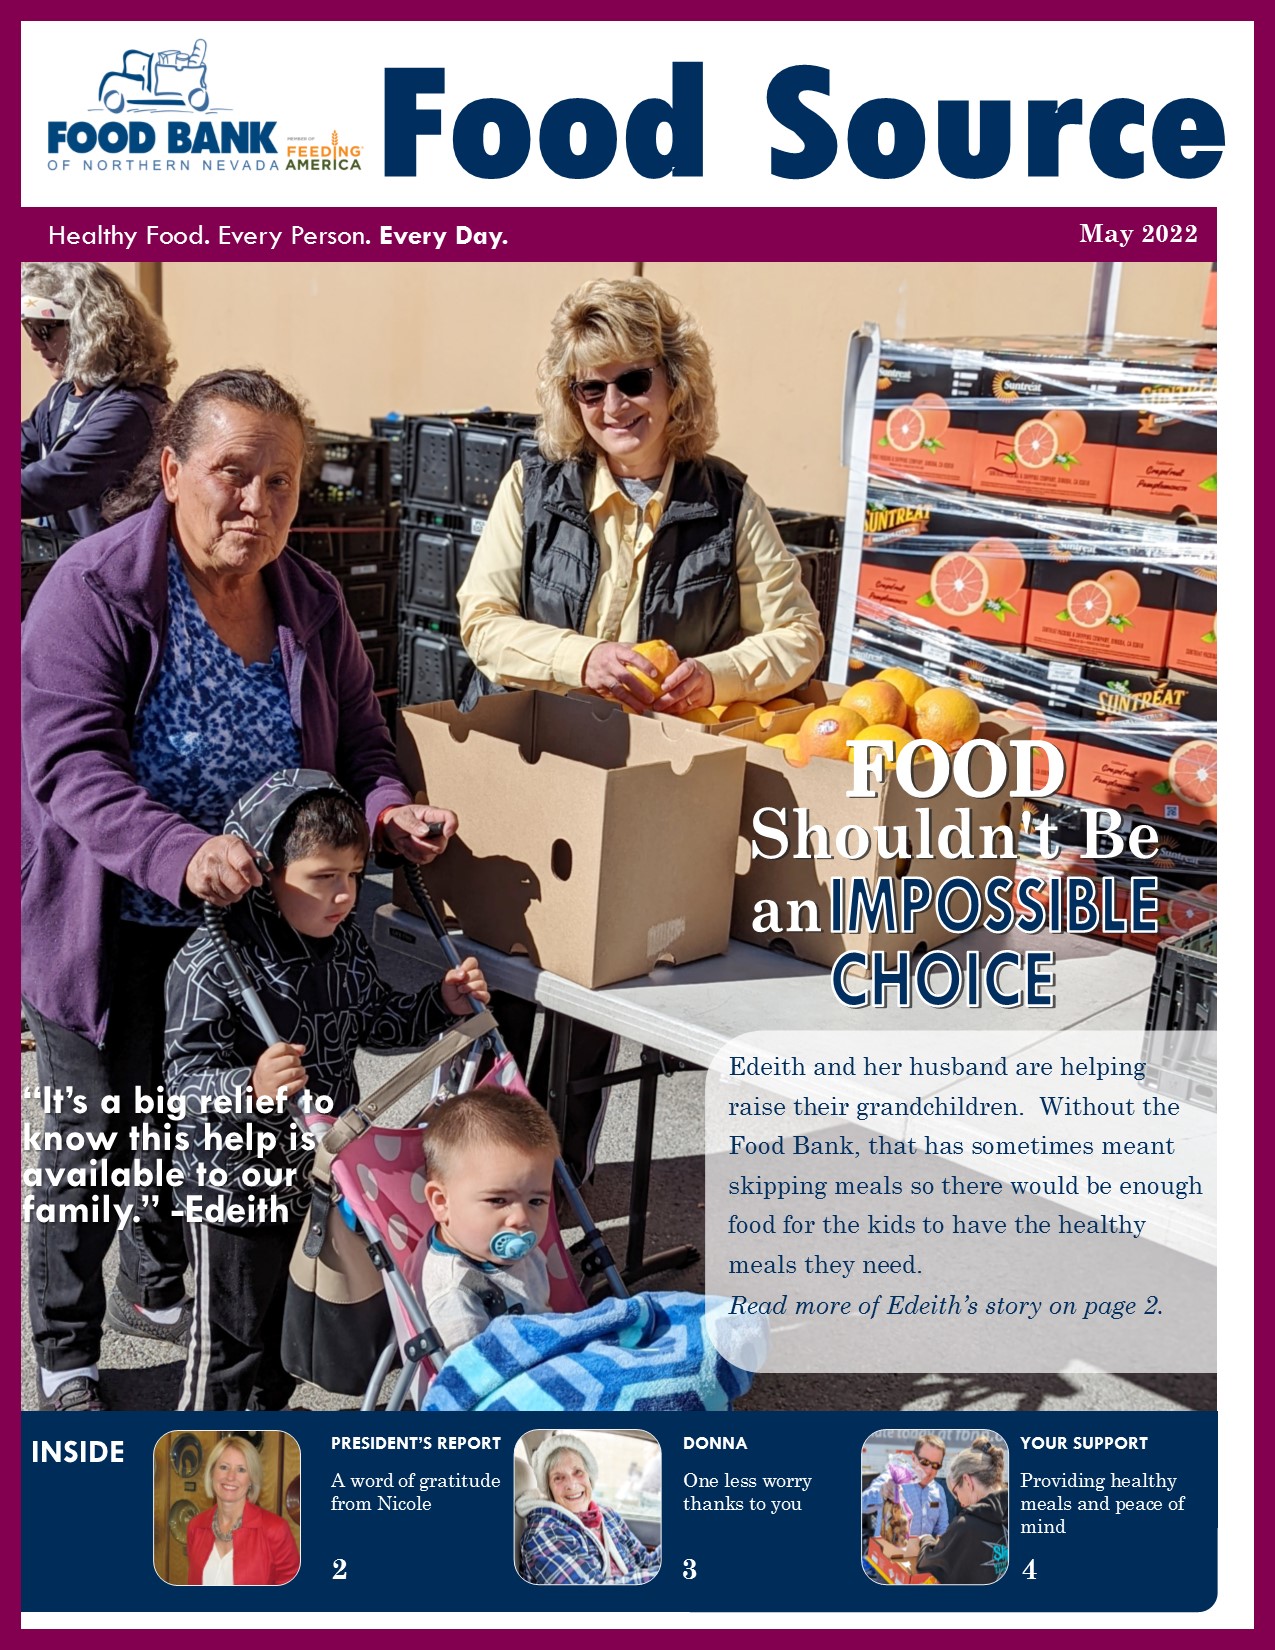 May 2021 Food Source Newsletter | Food Bank of Northern Nevada